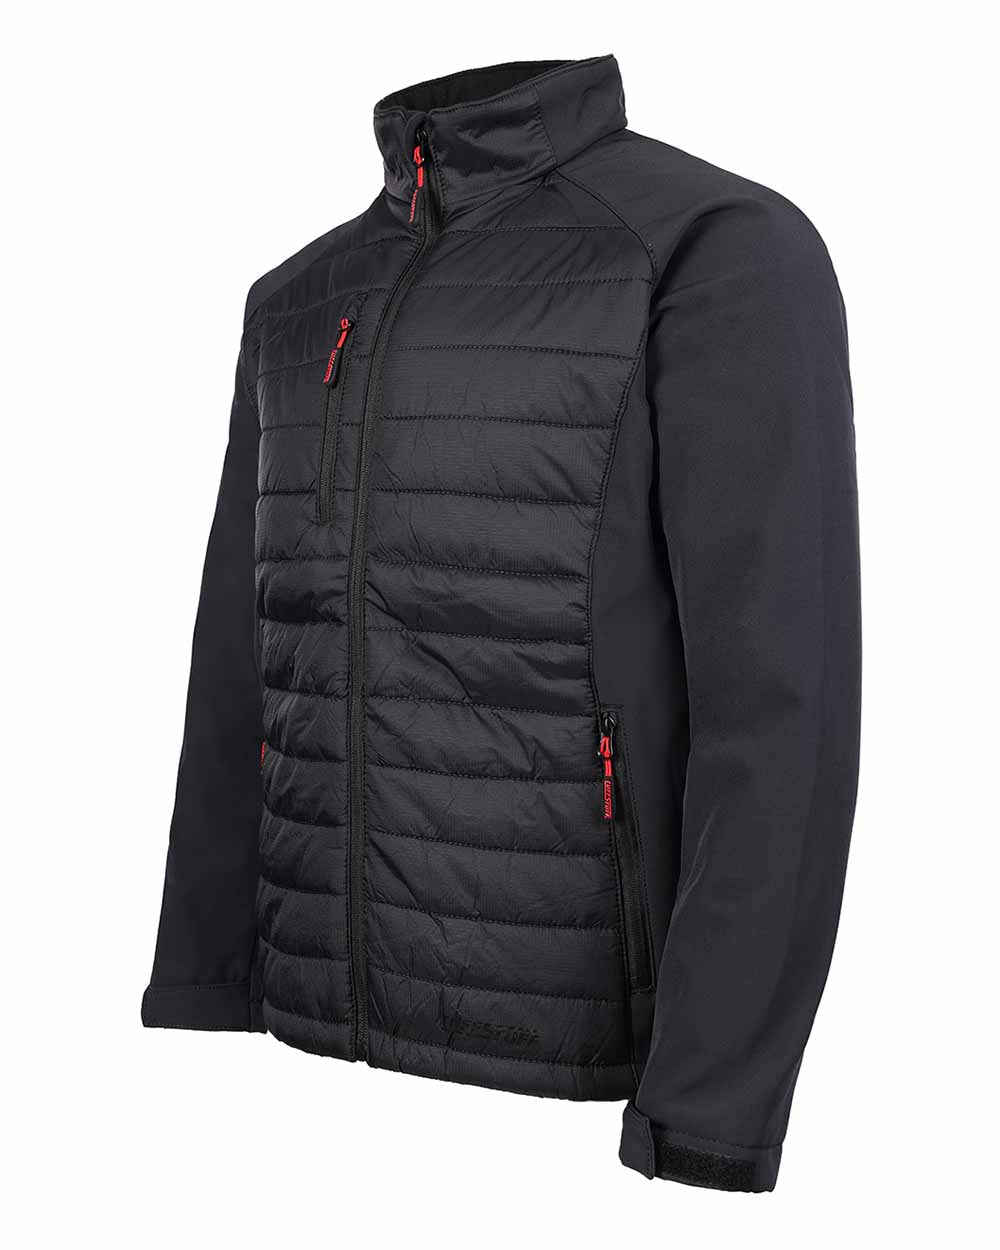 Side view showing zipped pockets TuffStuff Snape Softshell Jacket with quilted front 